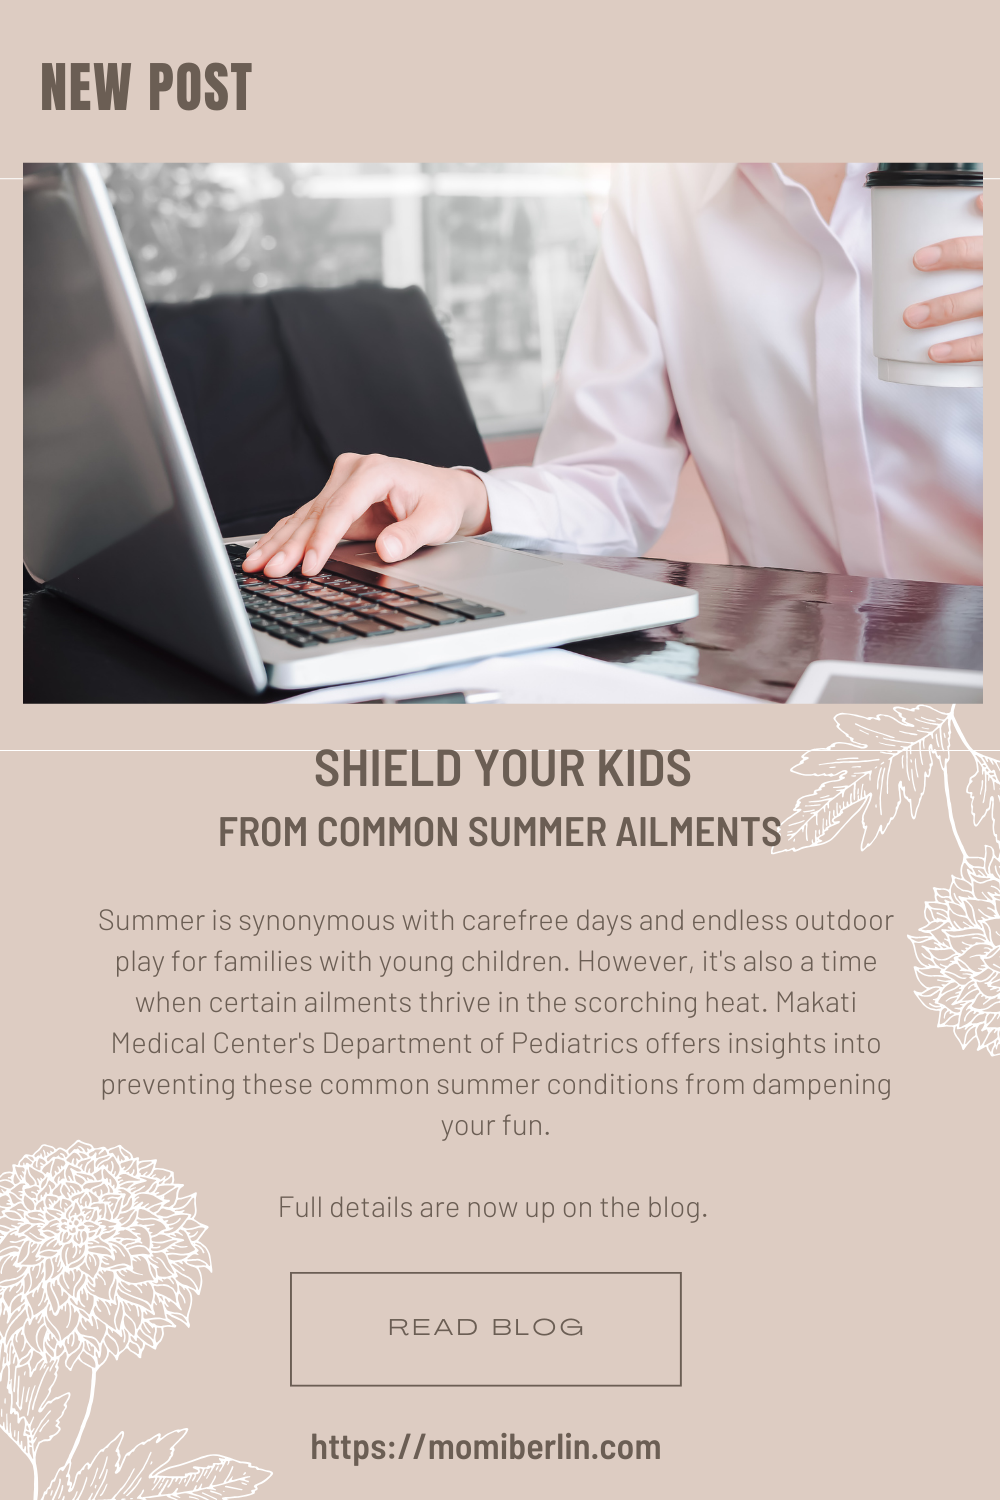 Shield Your Kids from Common Summer Ailments